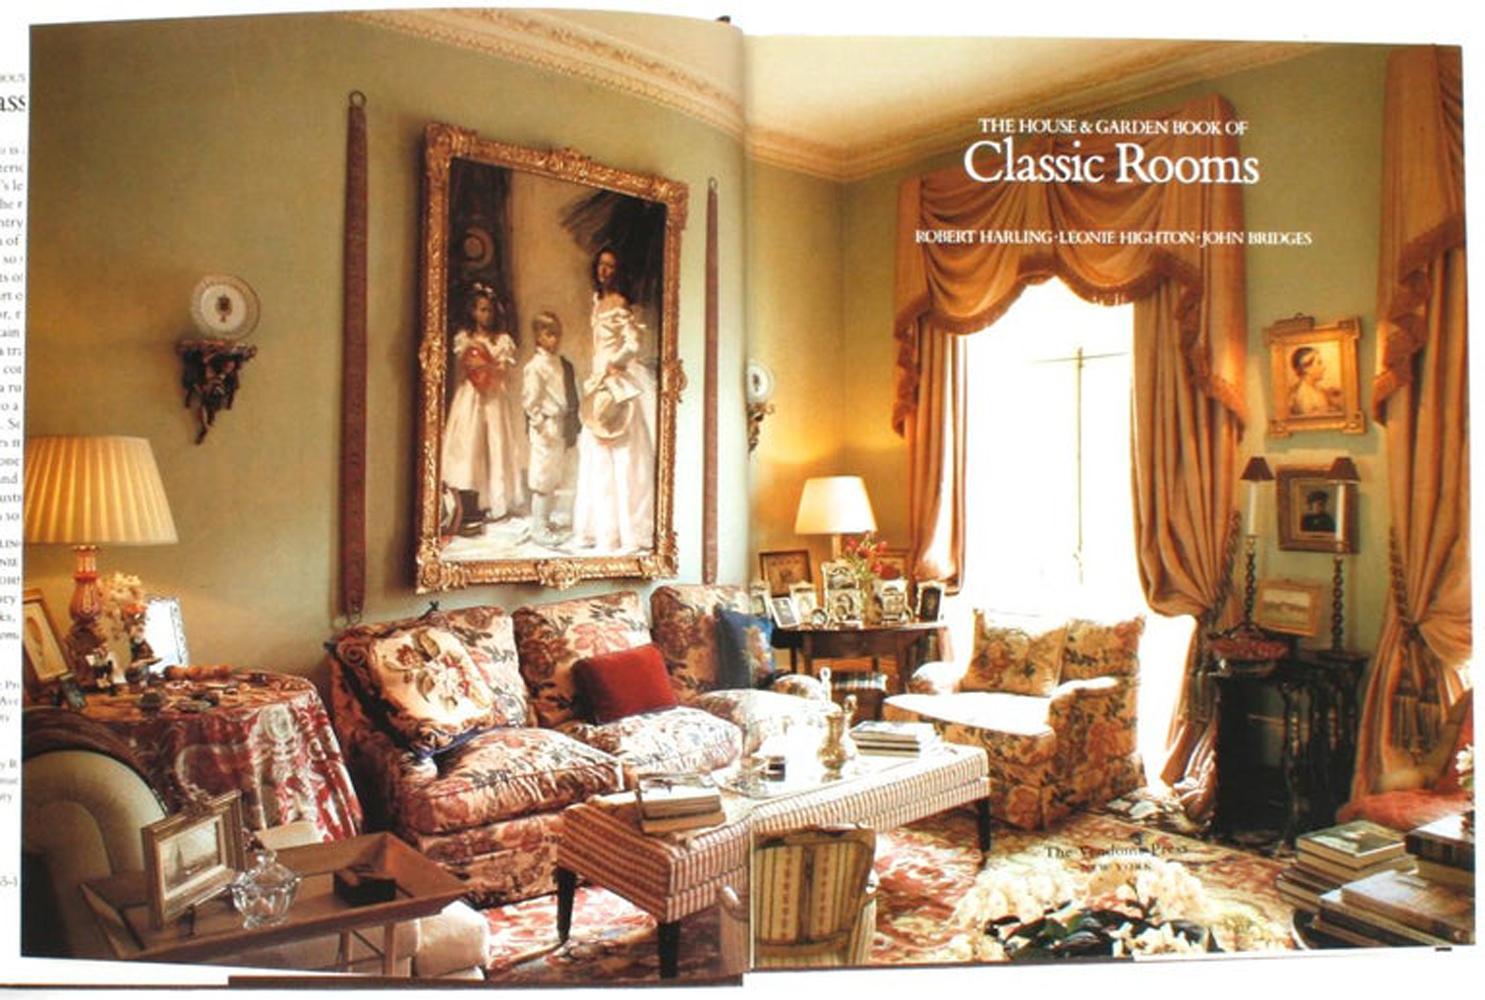 “The House and Garden Book of Classic Rooms” by Robert Harling. Vendome Press, New York, 1992. Second Edition hardcover with dust jacket. An illustrated book of interiors with 240 color photos representing emerging decorating themes in settings that